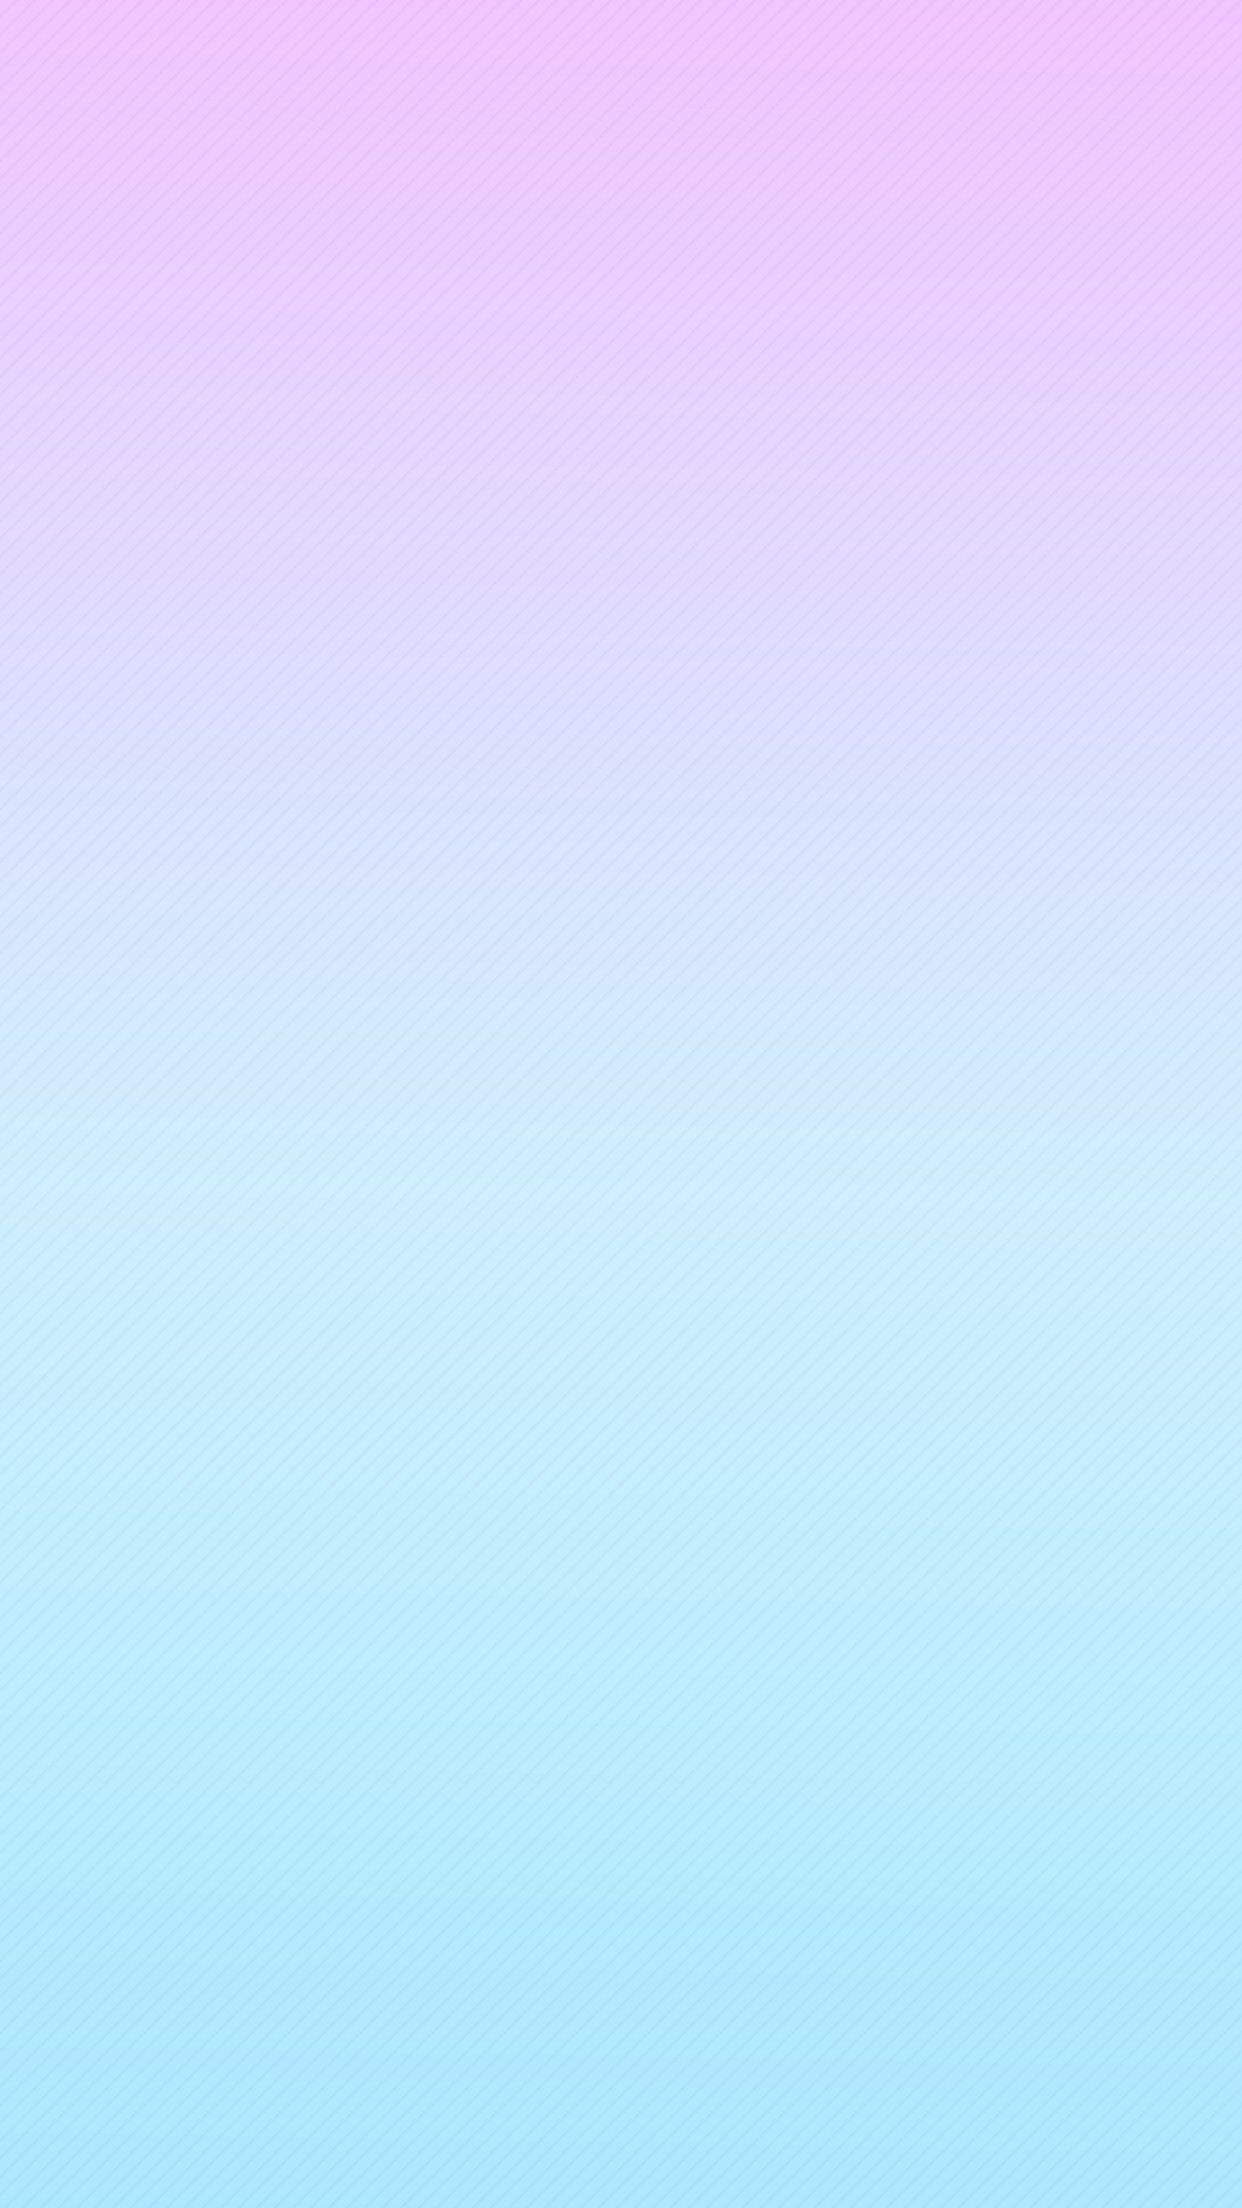 Pastel Blue Ombre Wallpaper Free Pastel Blue Ombre Background